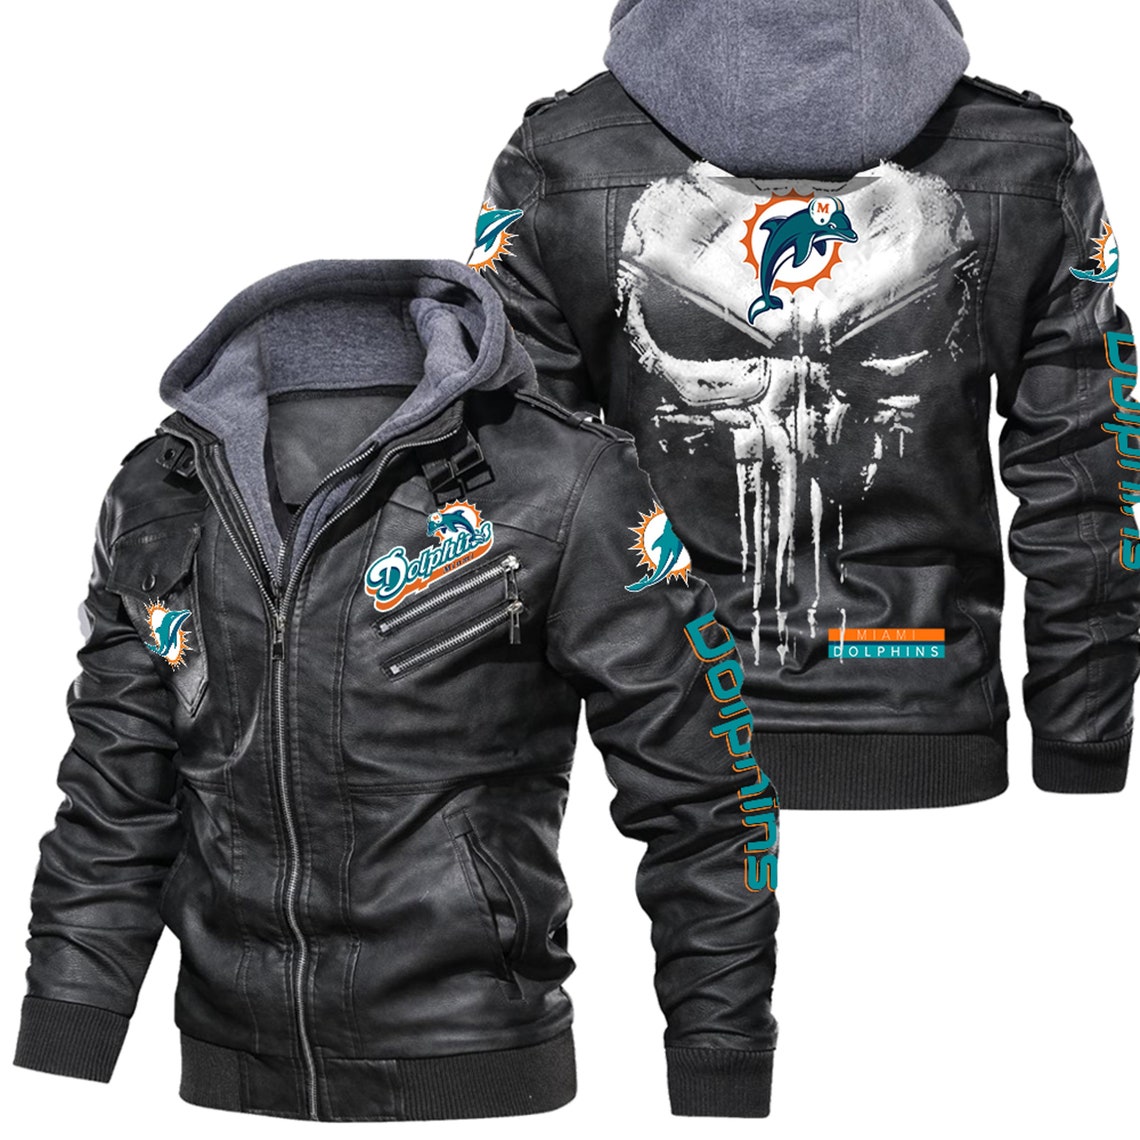 Miami Dolphins Shop - nfl miami dolphins leather jacket 3d skull88802